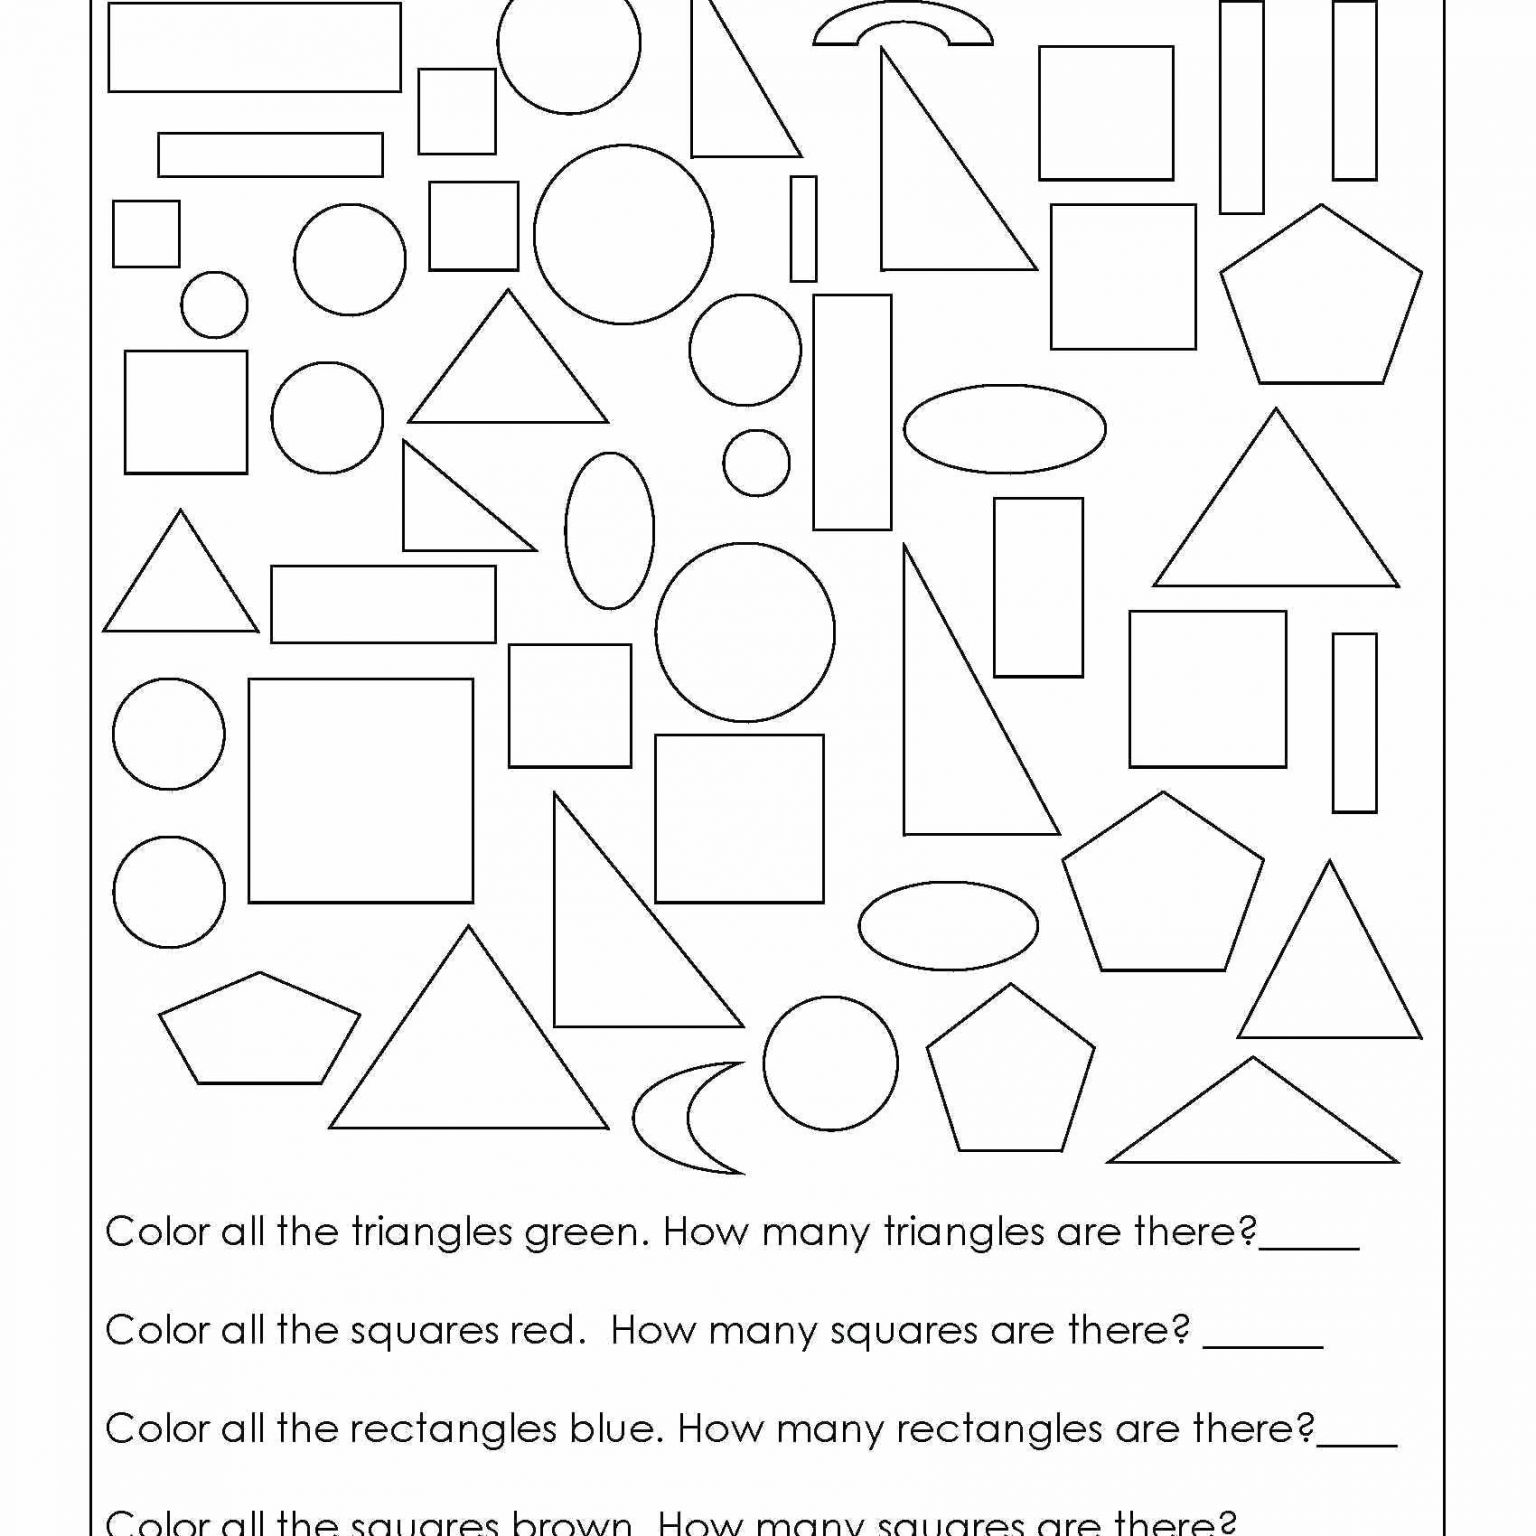 5-free-math-worksheets-fourth-grade-4-addition-adding-whole-tens-4-addends-amp